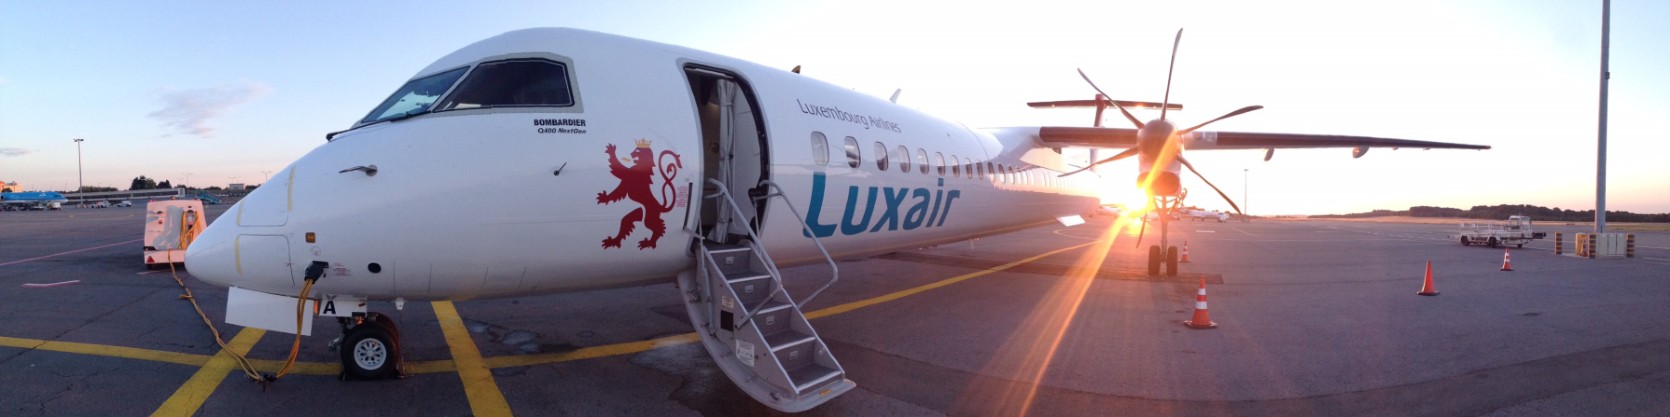 luxair id travel